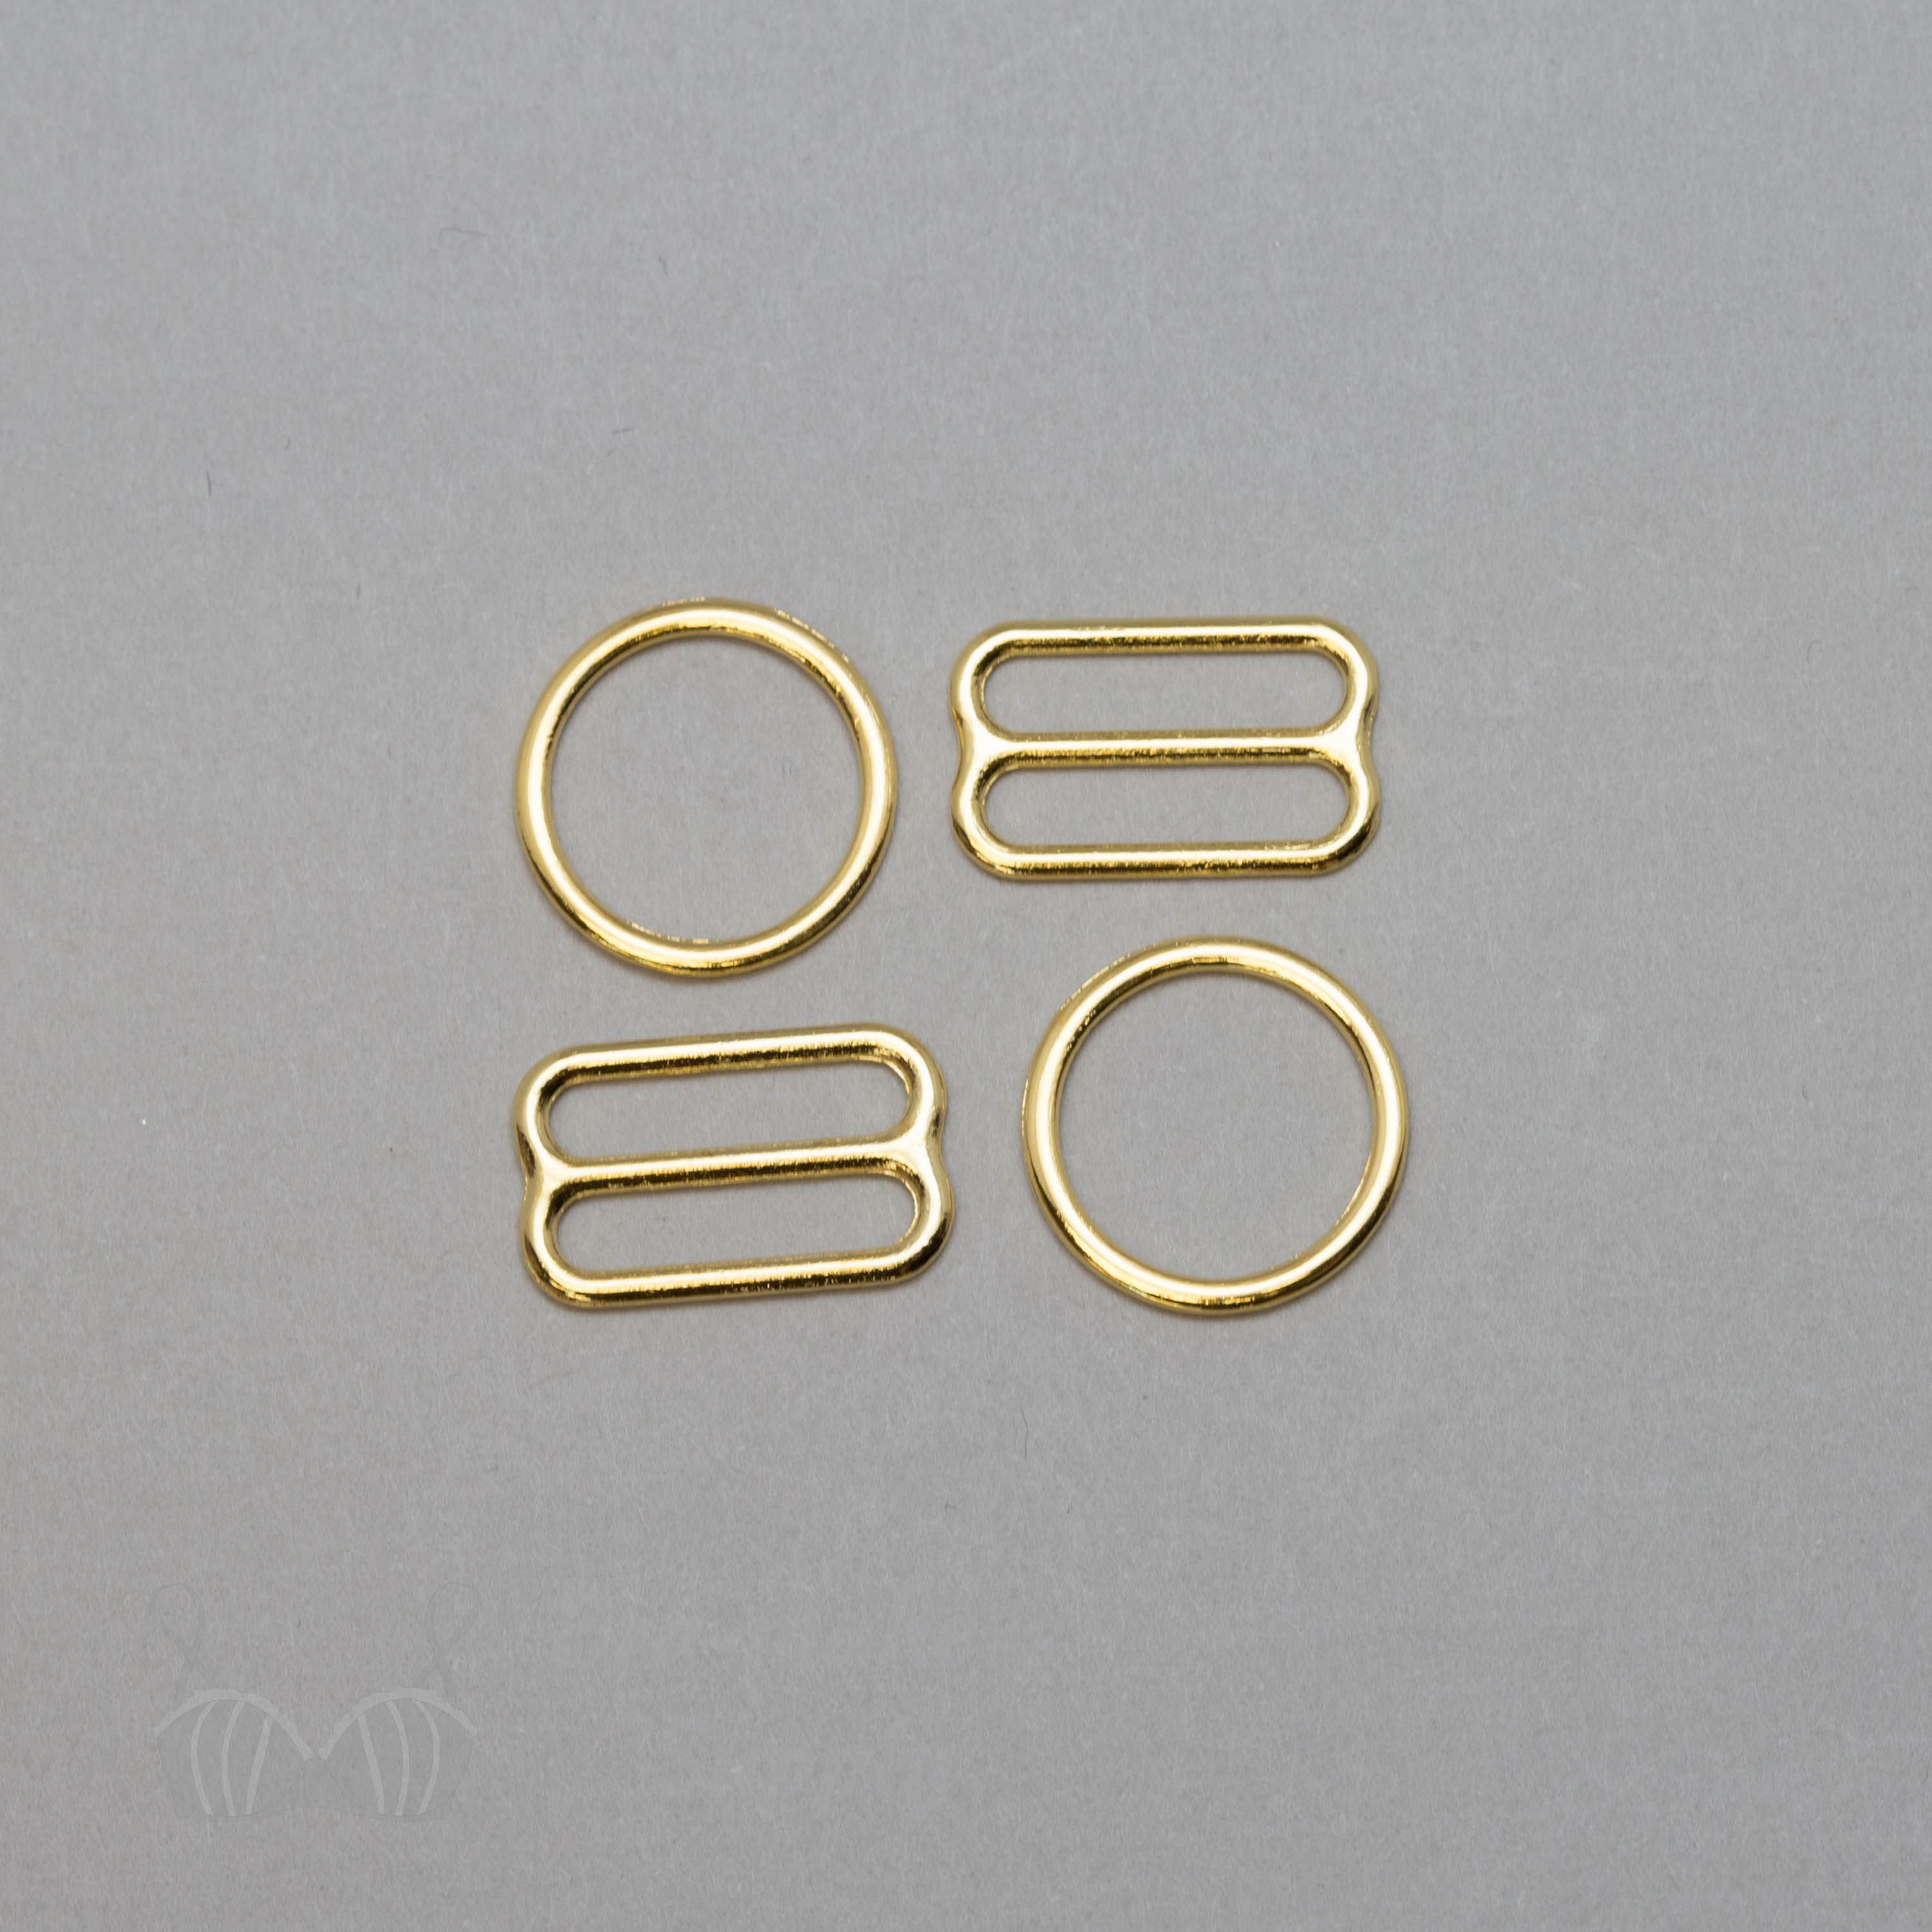 Wholesale 8mm gold bra slider For All Your Intimate Needs